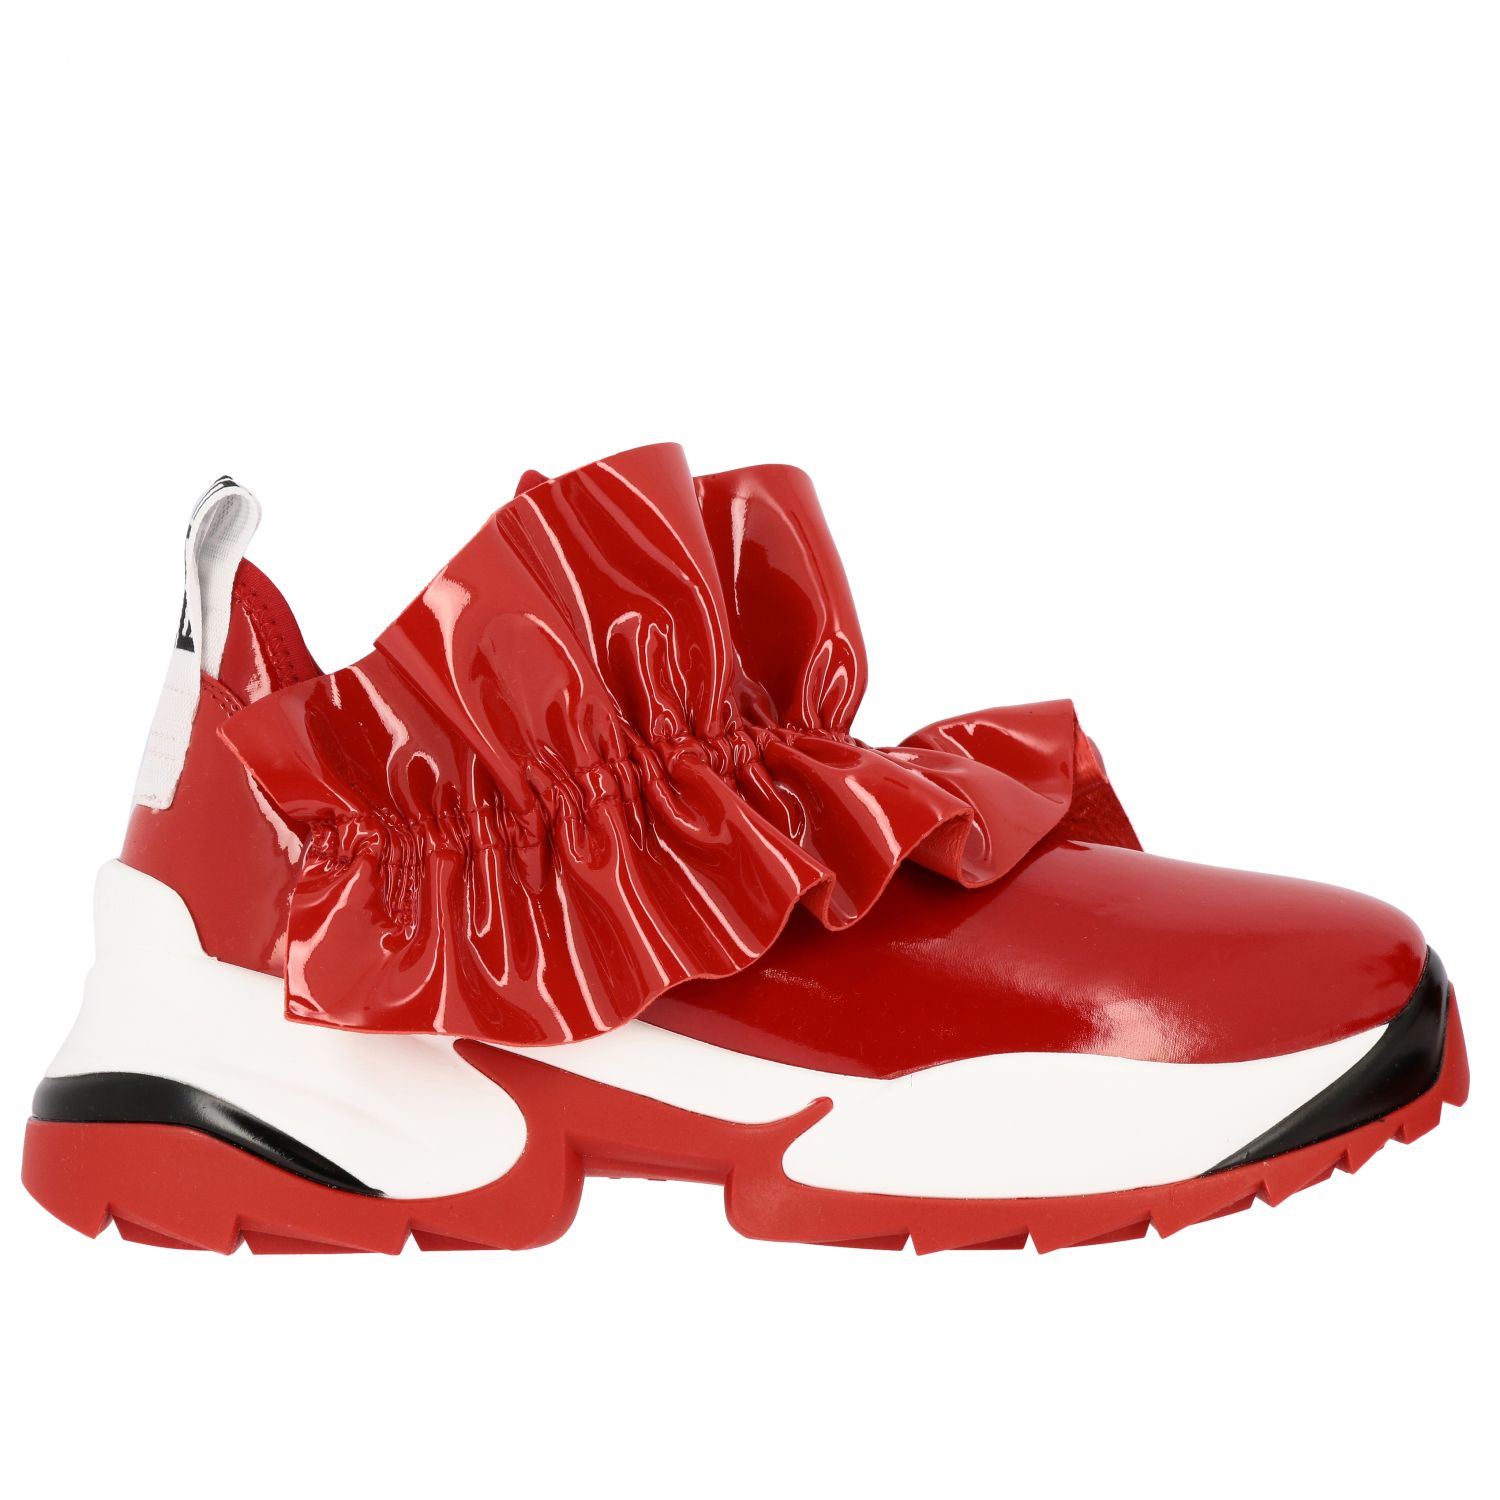 SERGIO ROSSI: Shoes women | Sneakers Sergio Rossi Women Red | Sneakers ...